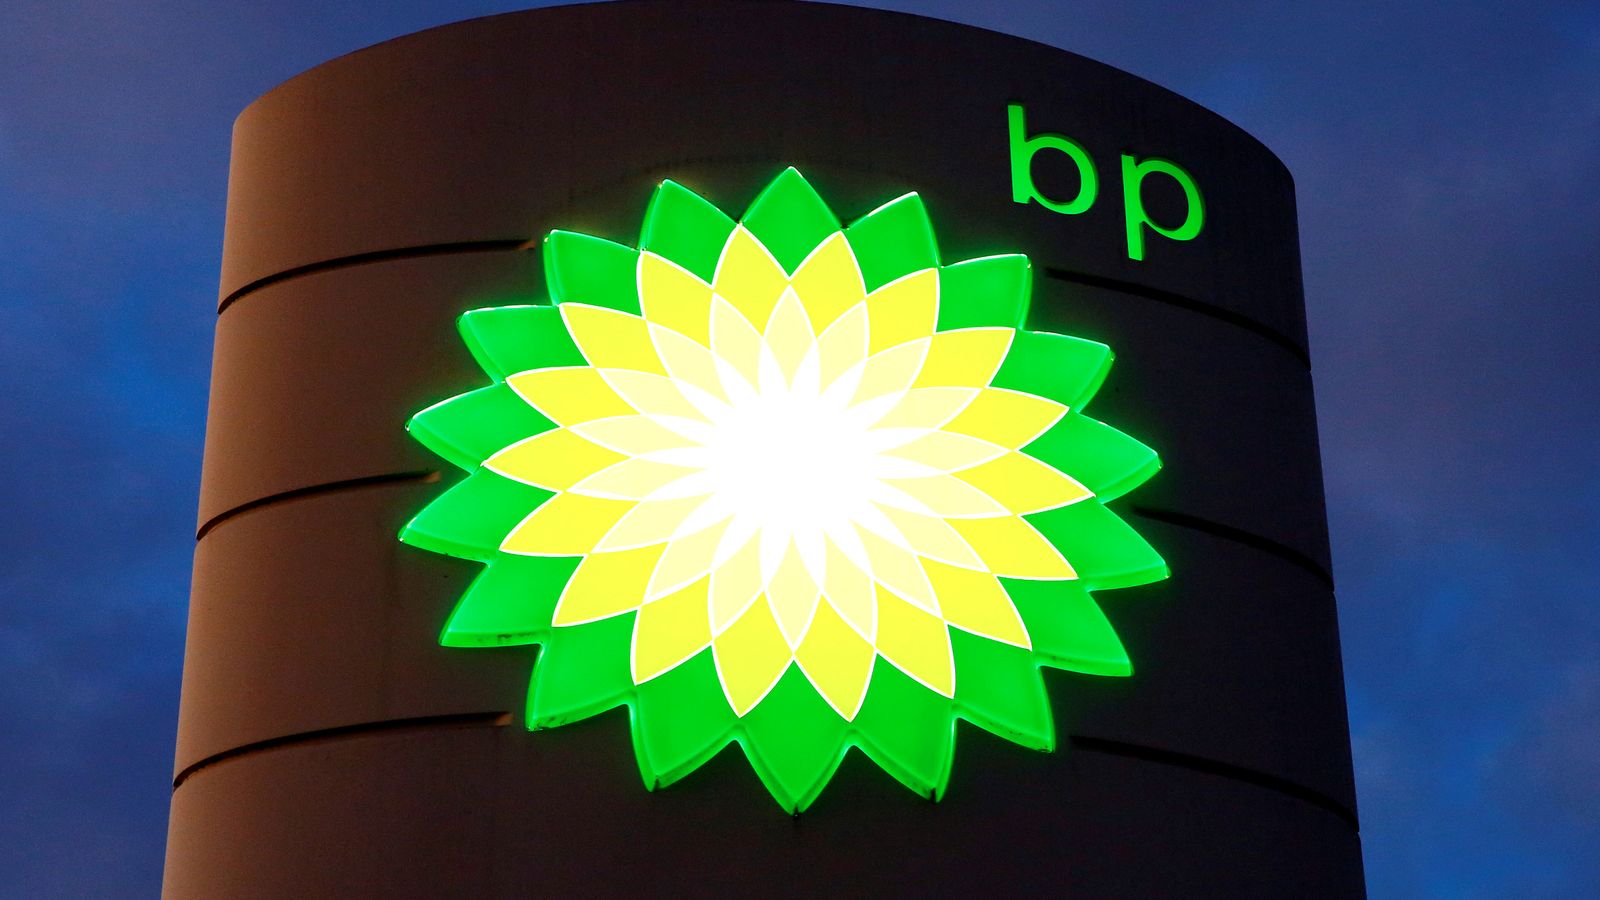 BP bolsters shareholder payouts as annual profits halve